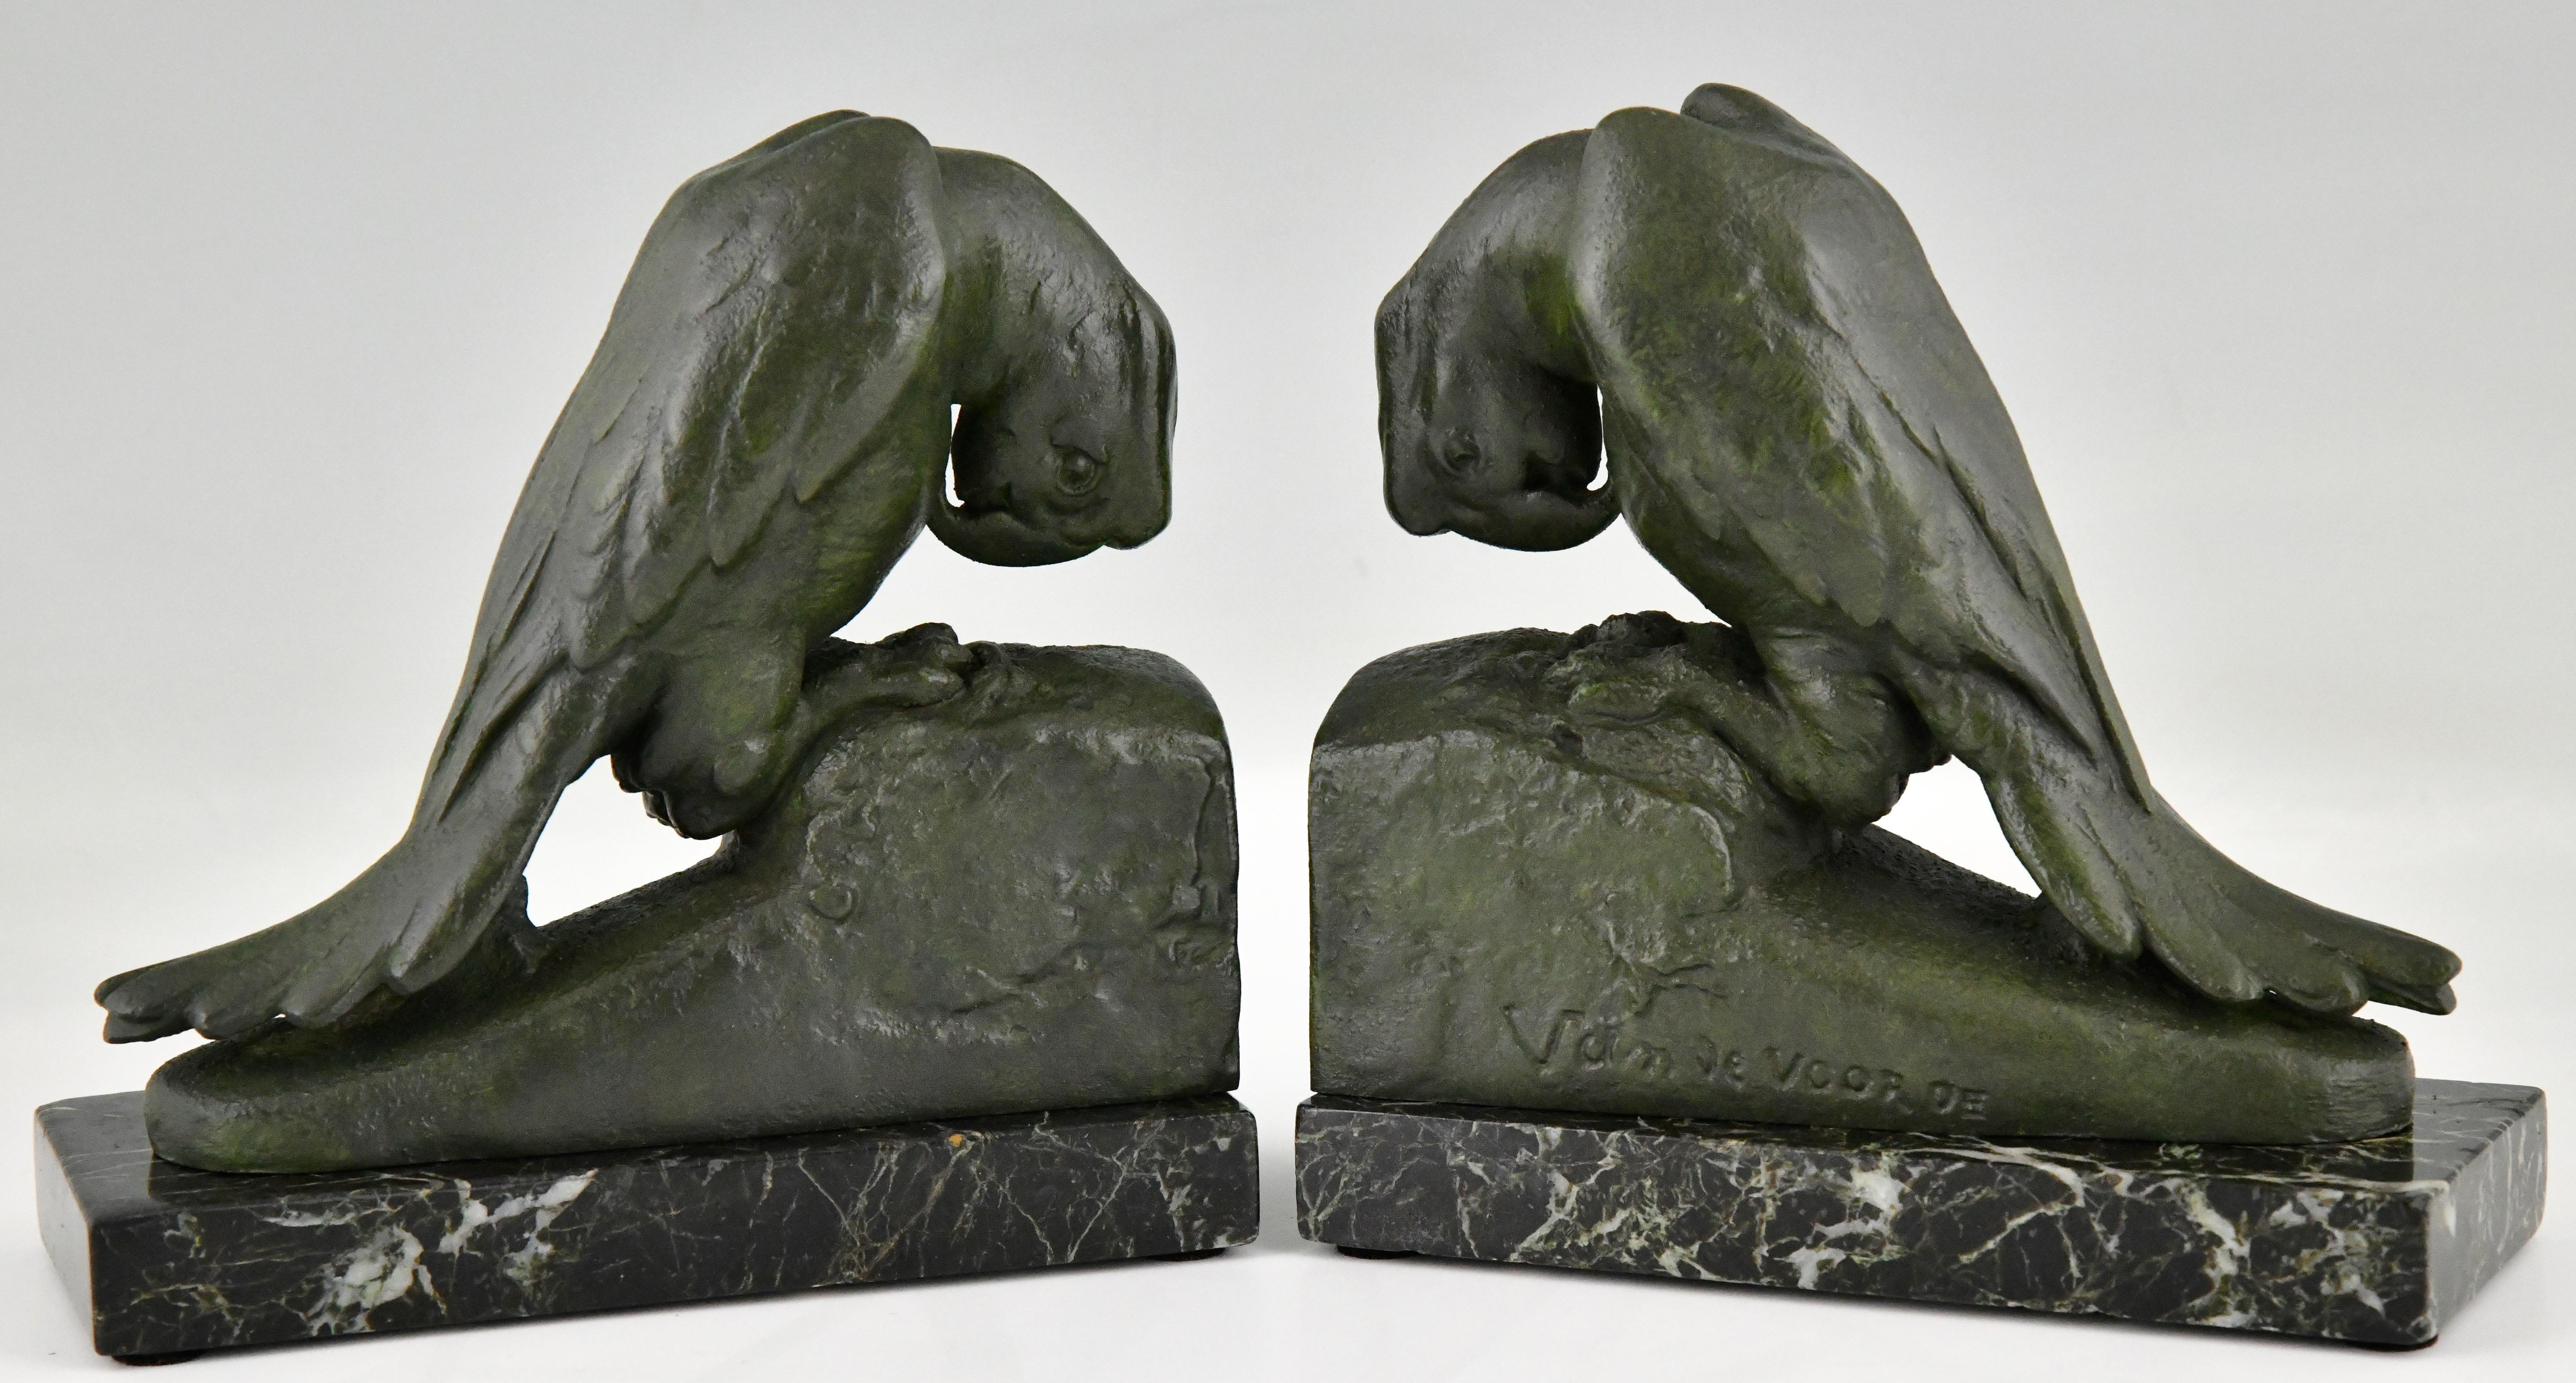 Art Deco parrot bookends by Georges Van de Voorde with Foundry seal Brig, Paris. 
The birds are in patinated Art metal and stand on green marble bases. Ca. 1930. 
Van de Voorde was a Belgian artist born in 1878 who worked in France.
These